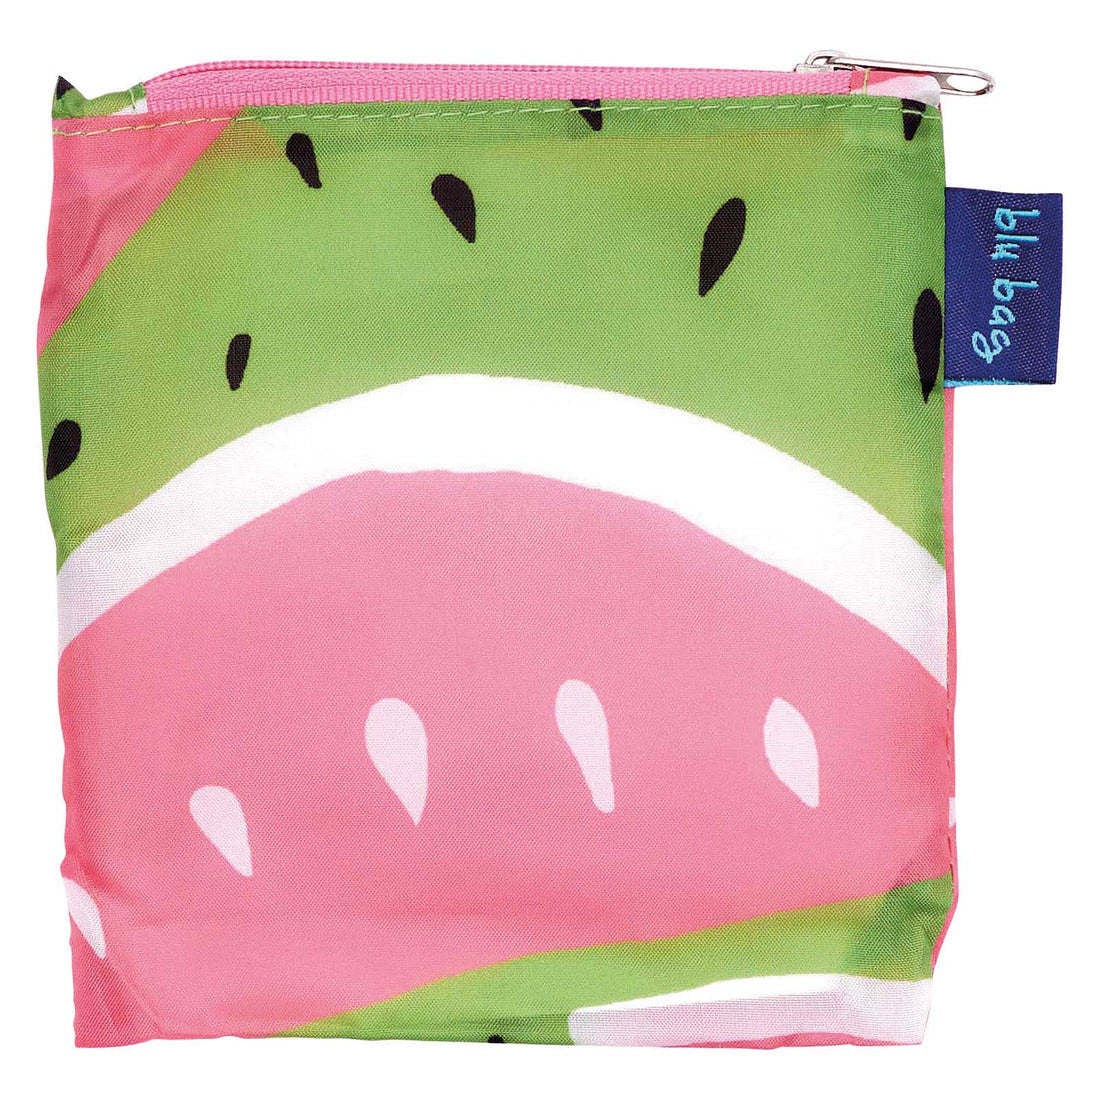 A colorful eco-friendly Rockflowerpaper BLU BAG WATERMELON with a watermelon print design, featuring pink and green hues and seed patterns, with a zipper on top.